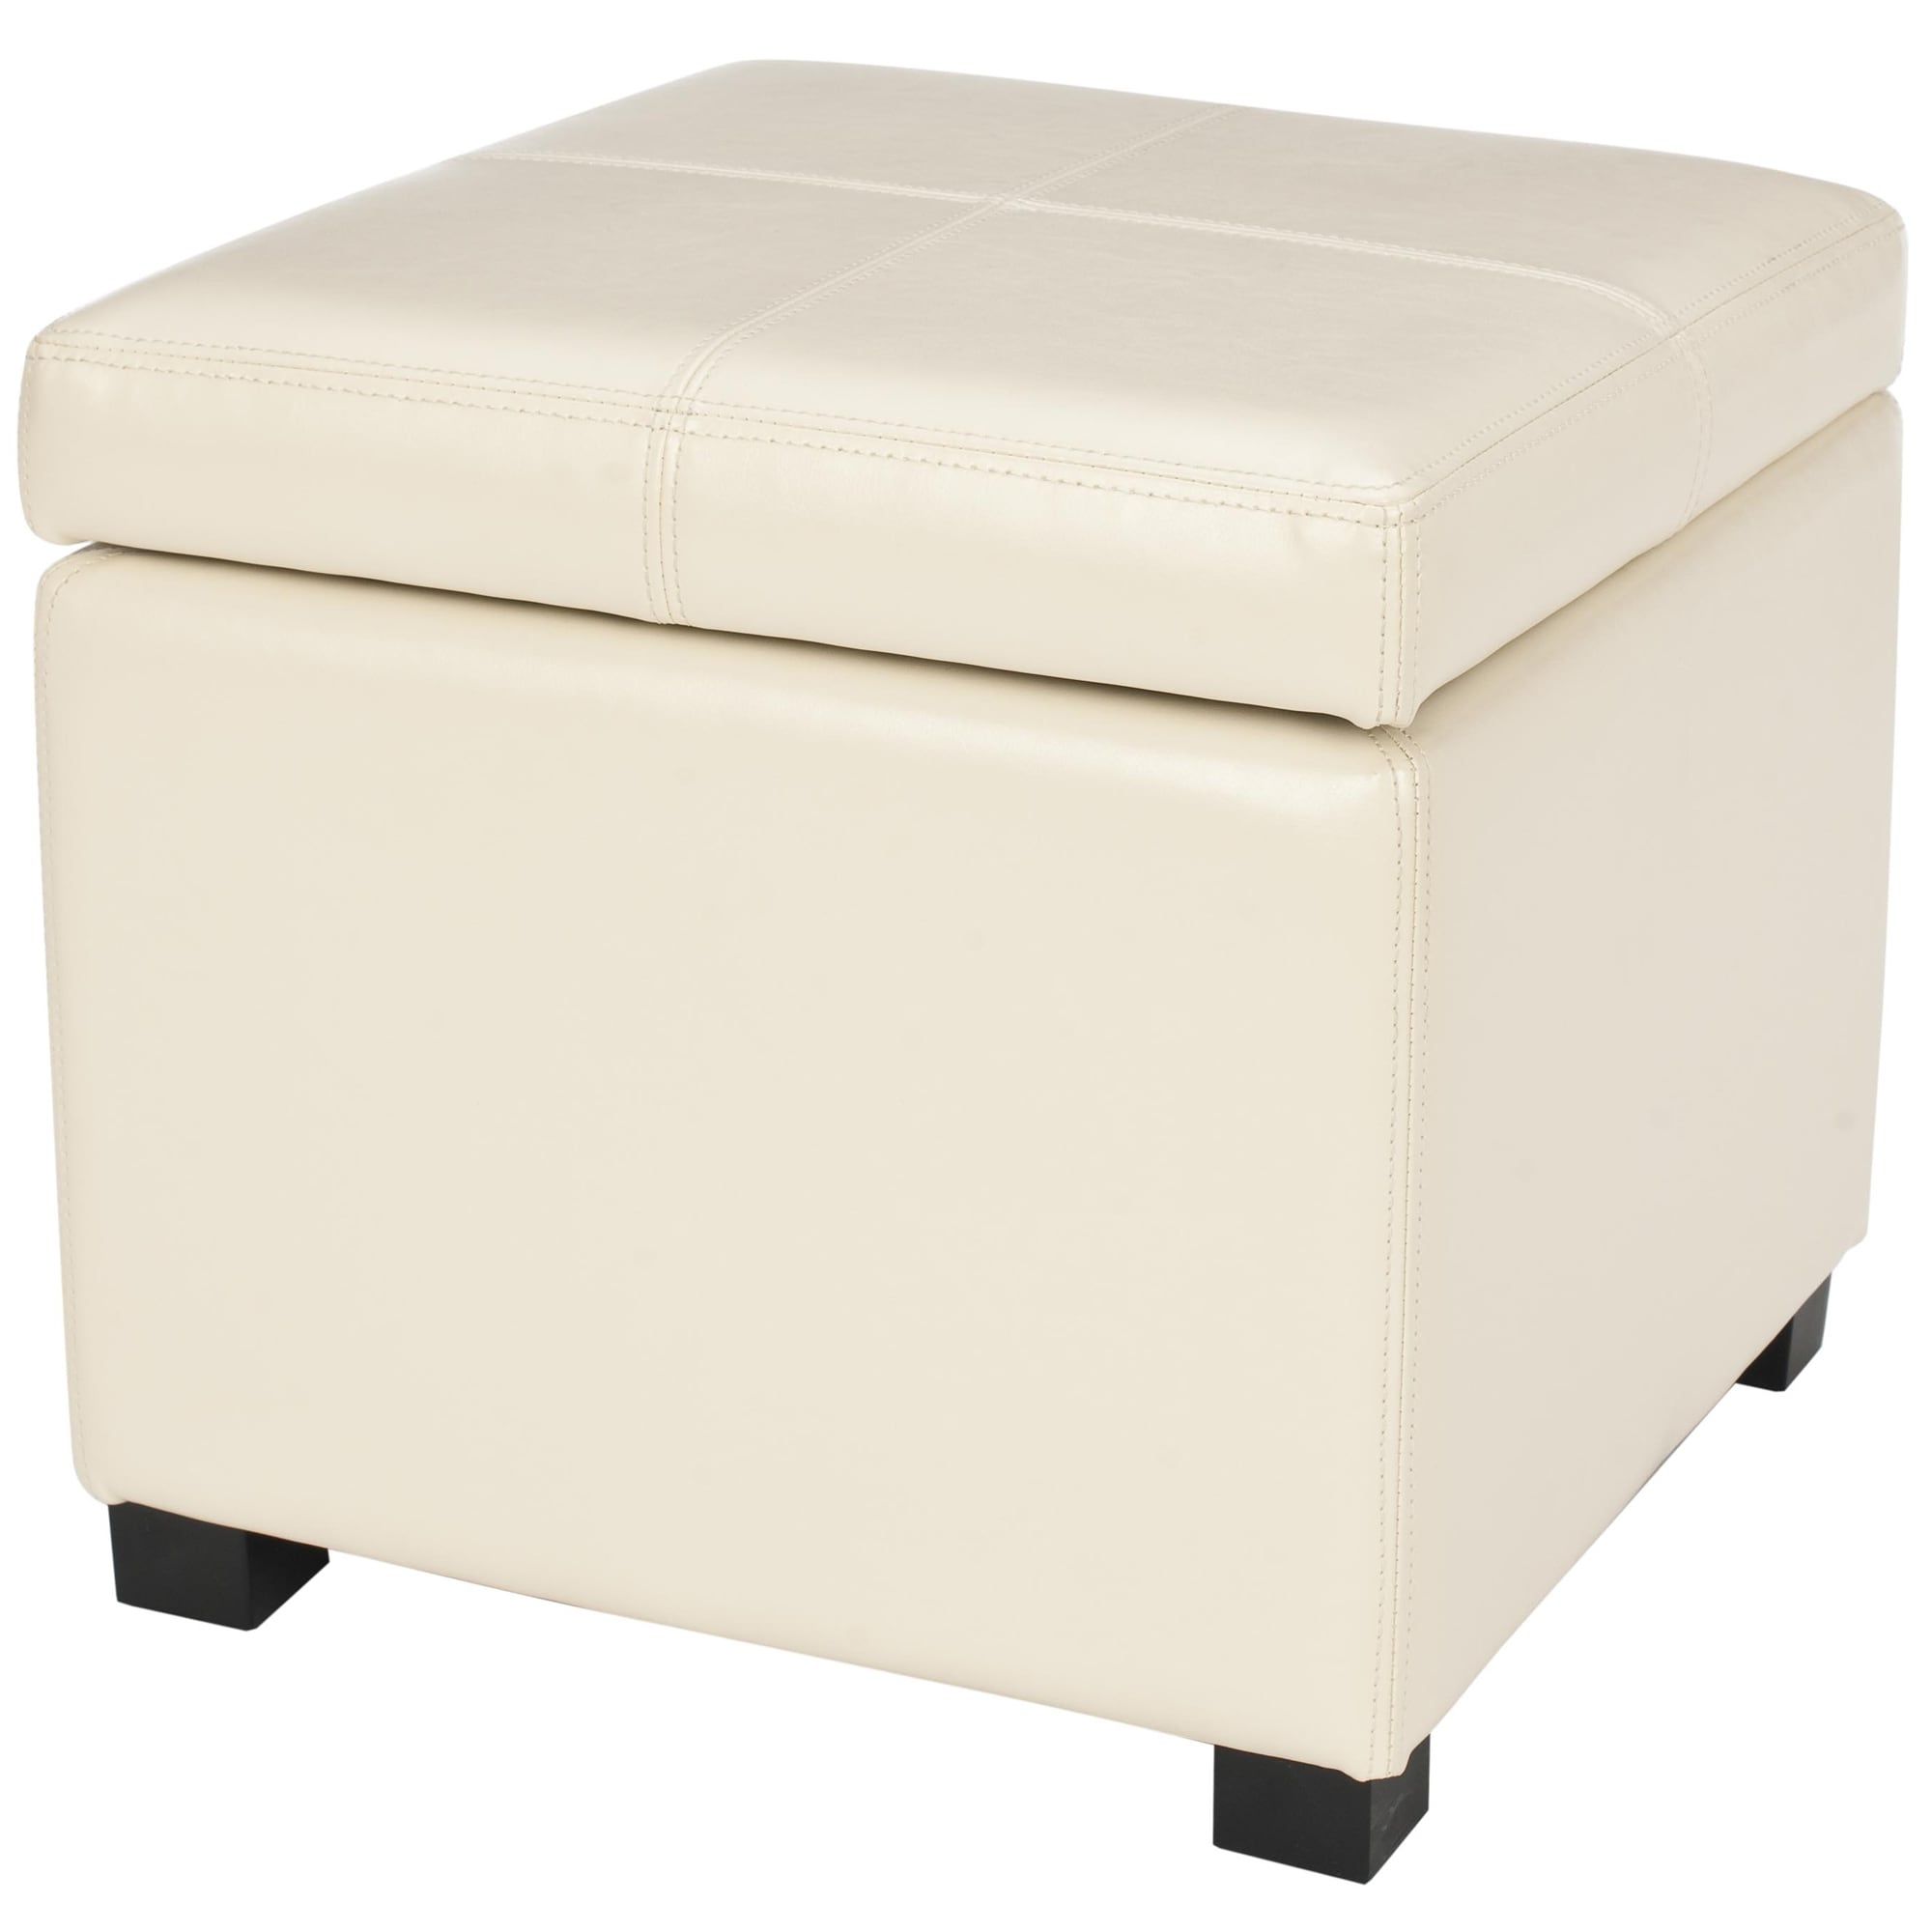 Shop Safavieh Broadway Cream Leather Storage Ottoman – Free Shipping On For Recent Cream Pouf Ottomans (View 8 of 10)